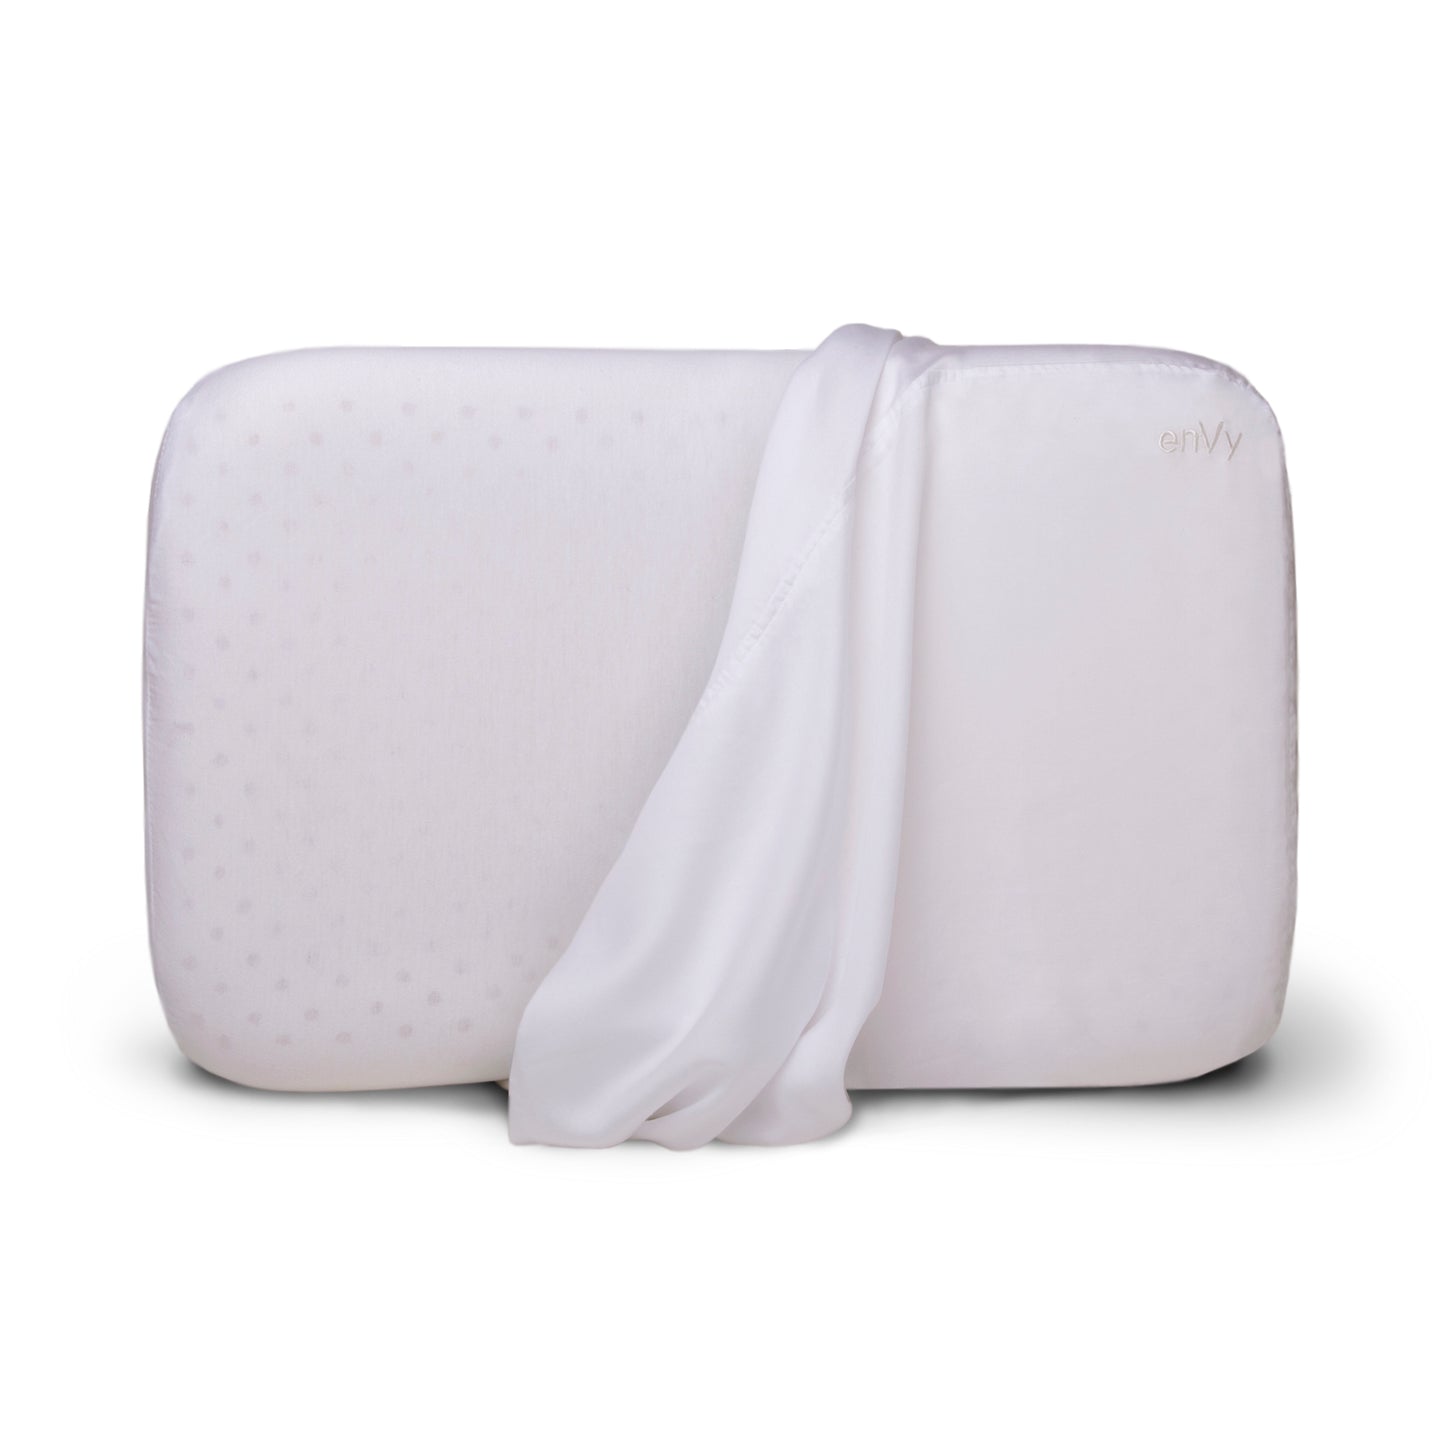 The enVy® COPPER + Botanical TENCEL™  Anti-Aging Pillow - 100% Natural Latex Pillow with COPPER infused TENCEL™  Pillowcase